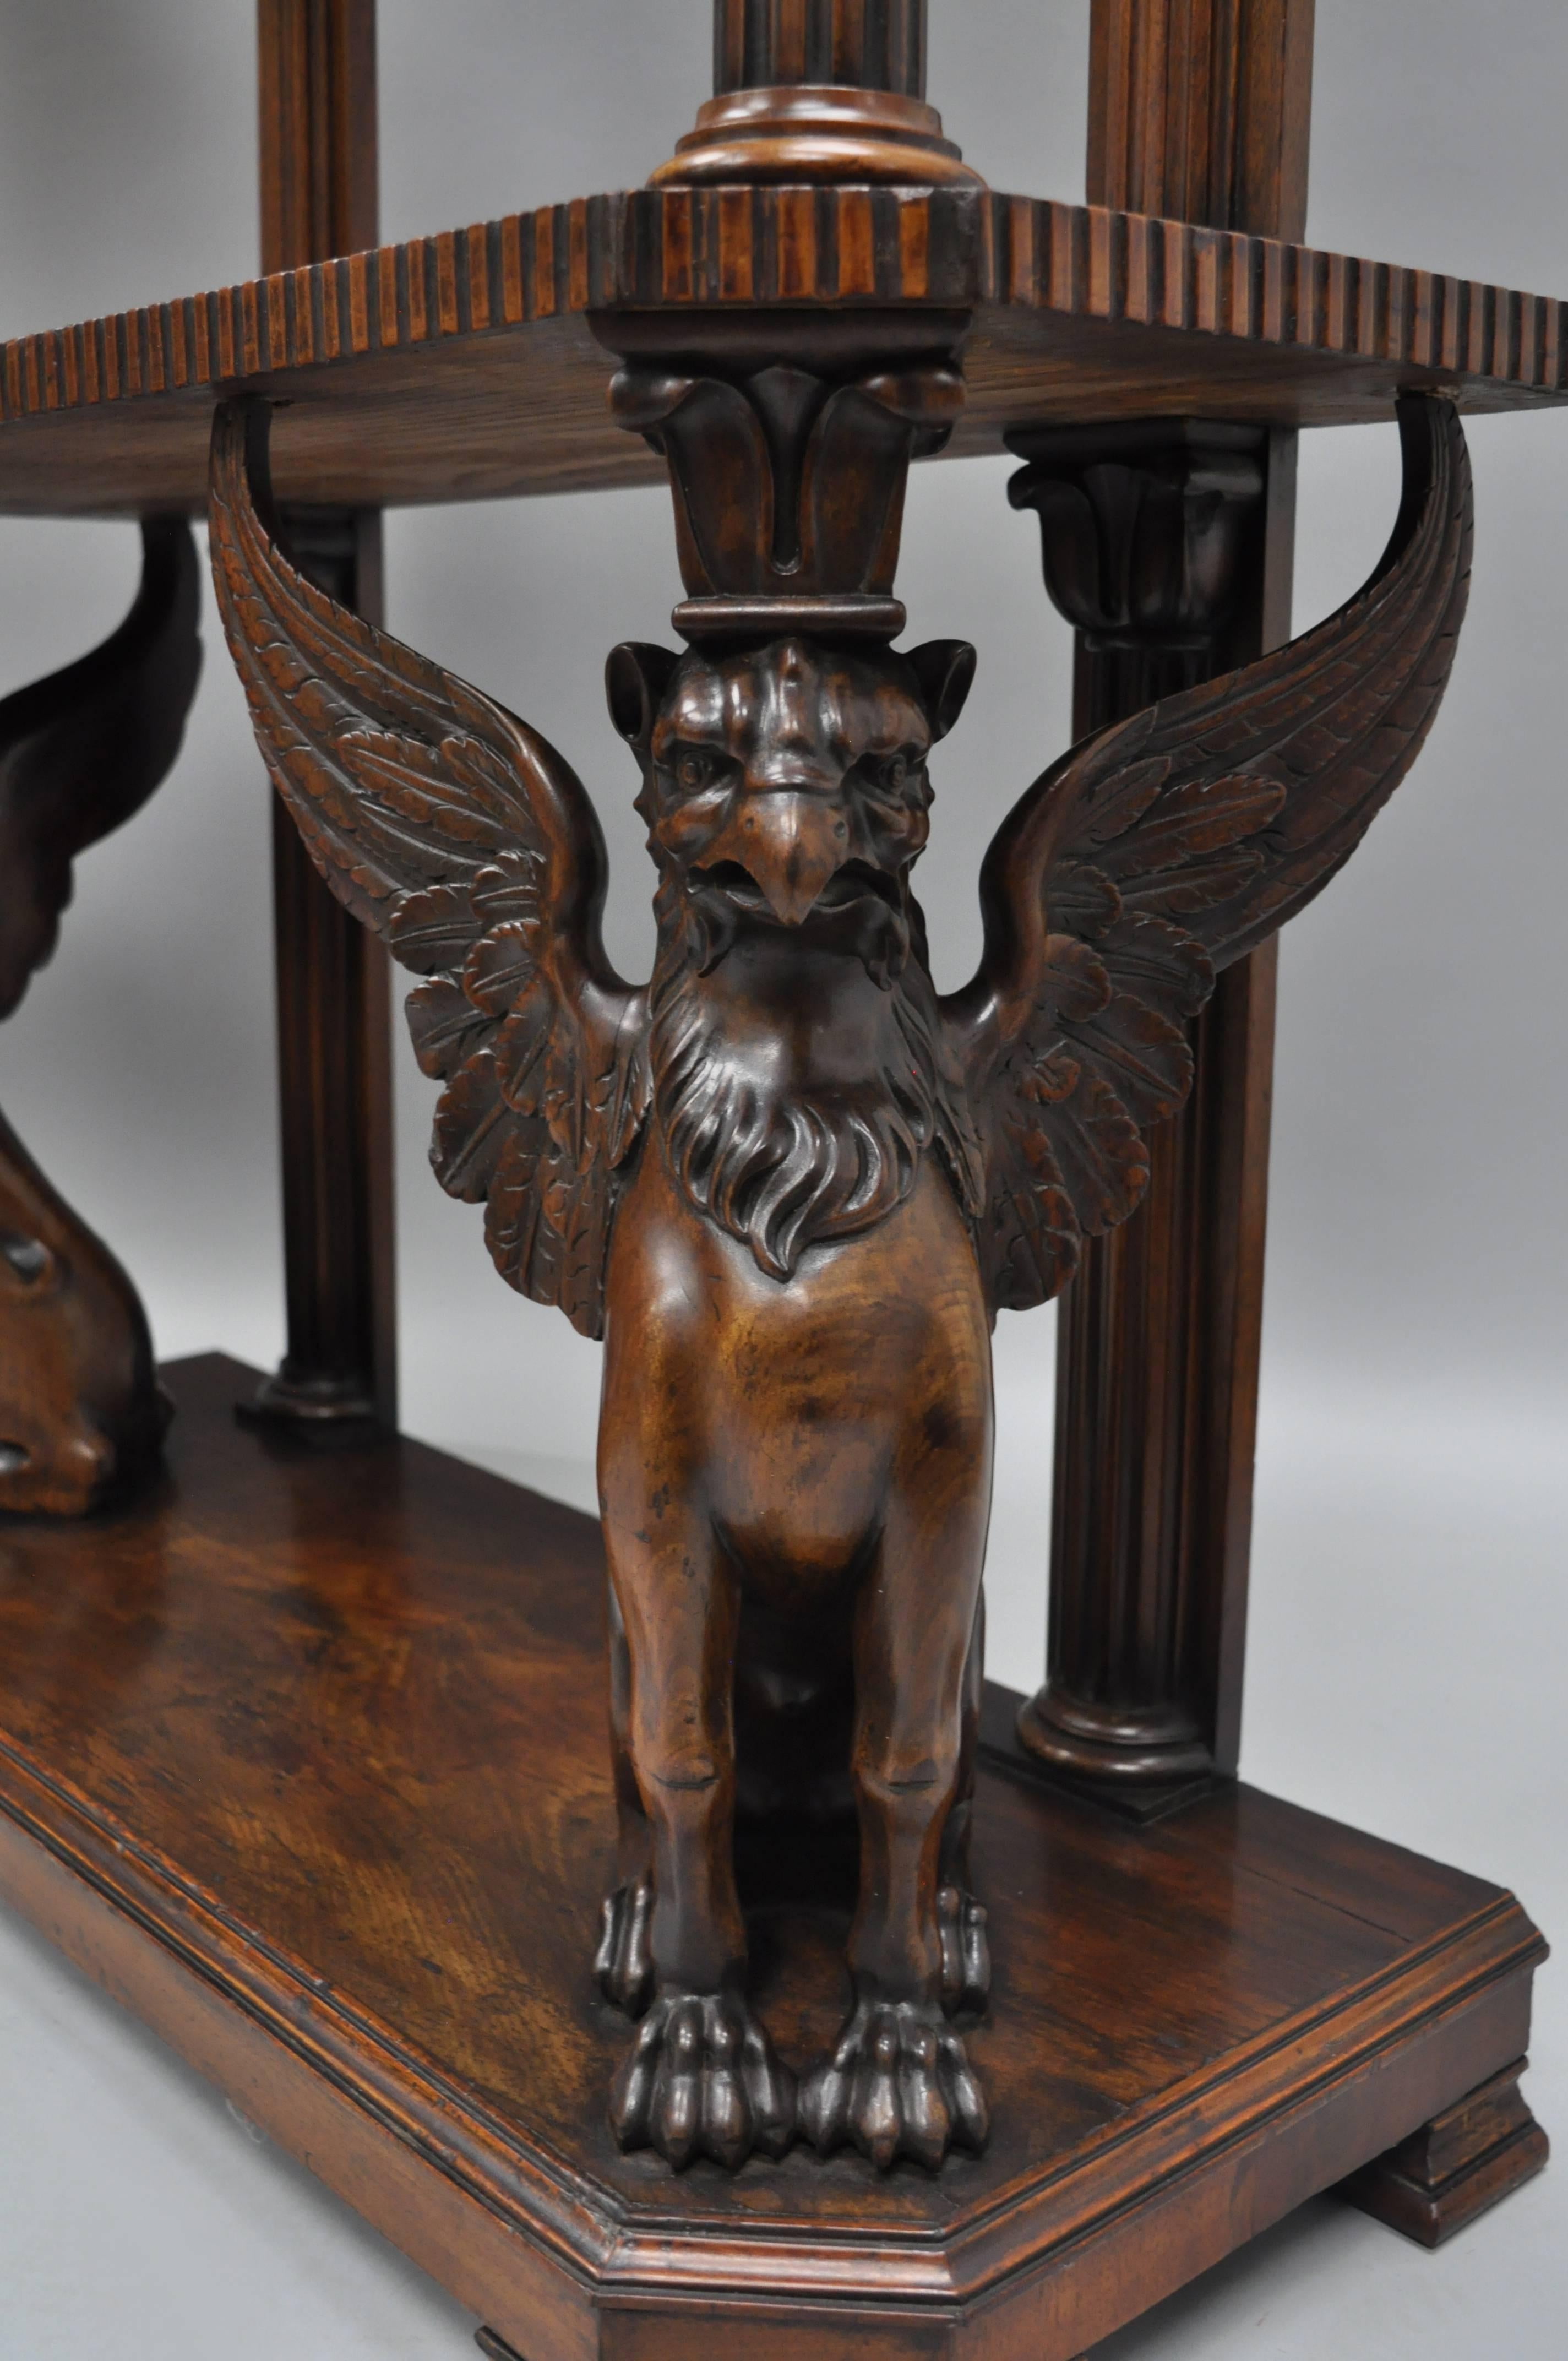 A Pair of Mahogany English Regency Style Carved Winged Griffin Whatnot Curio Stands in the R.J. Horner Style. The pair features finely detailed full figured winged griffins, pierce carved gallery, column supports, beautiful crotch mahogany wood